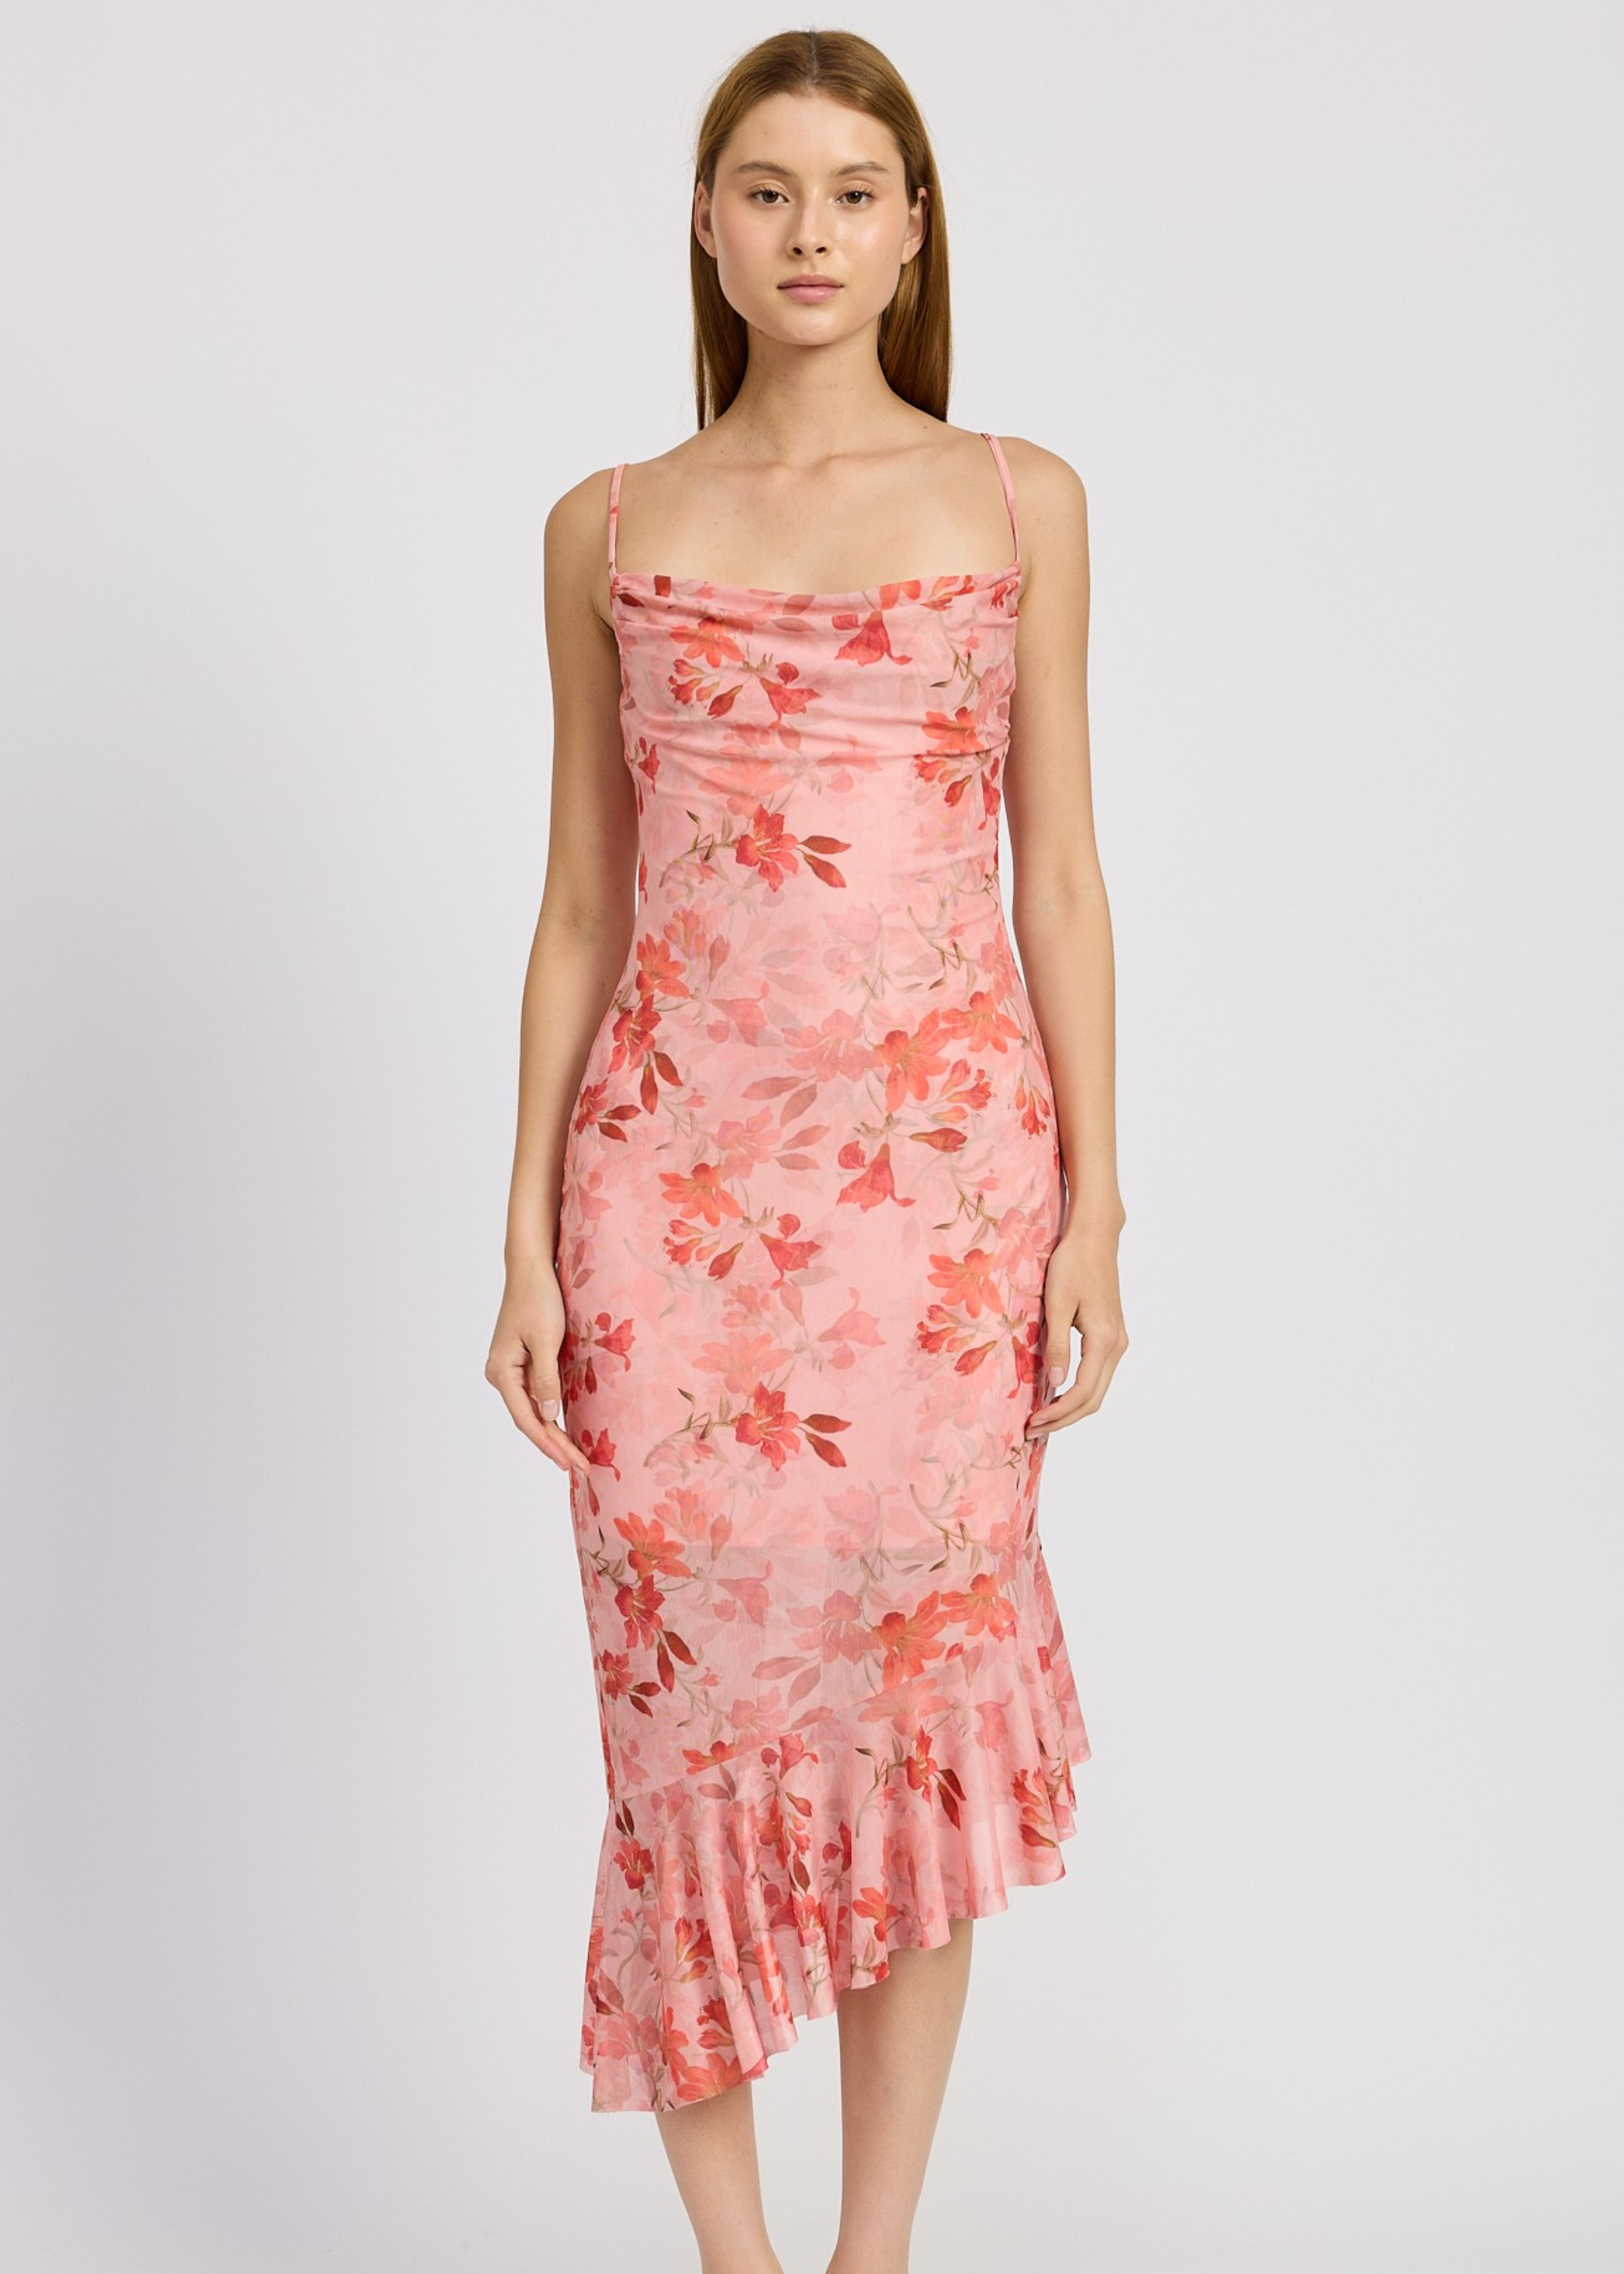 Floral Asymmetrical Dress With Ruffle Detail